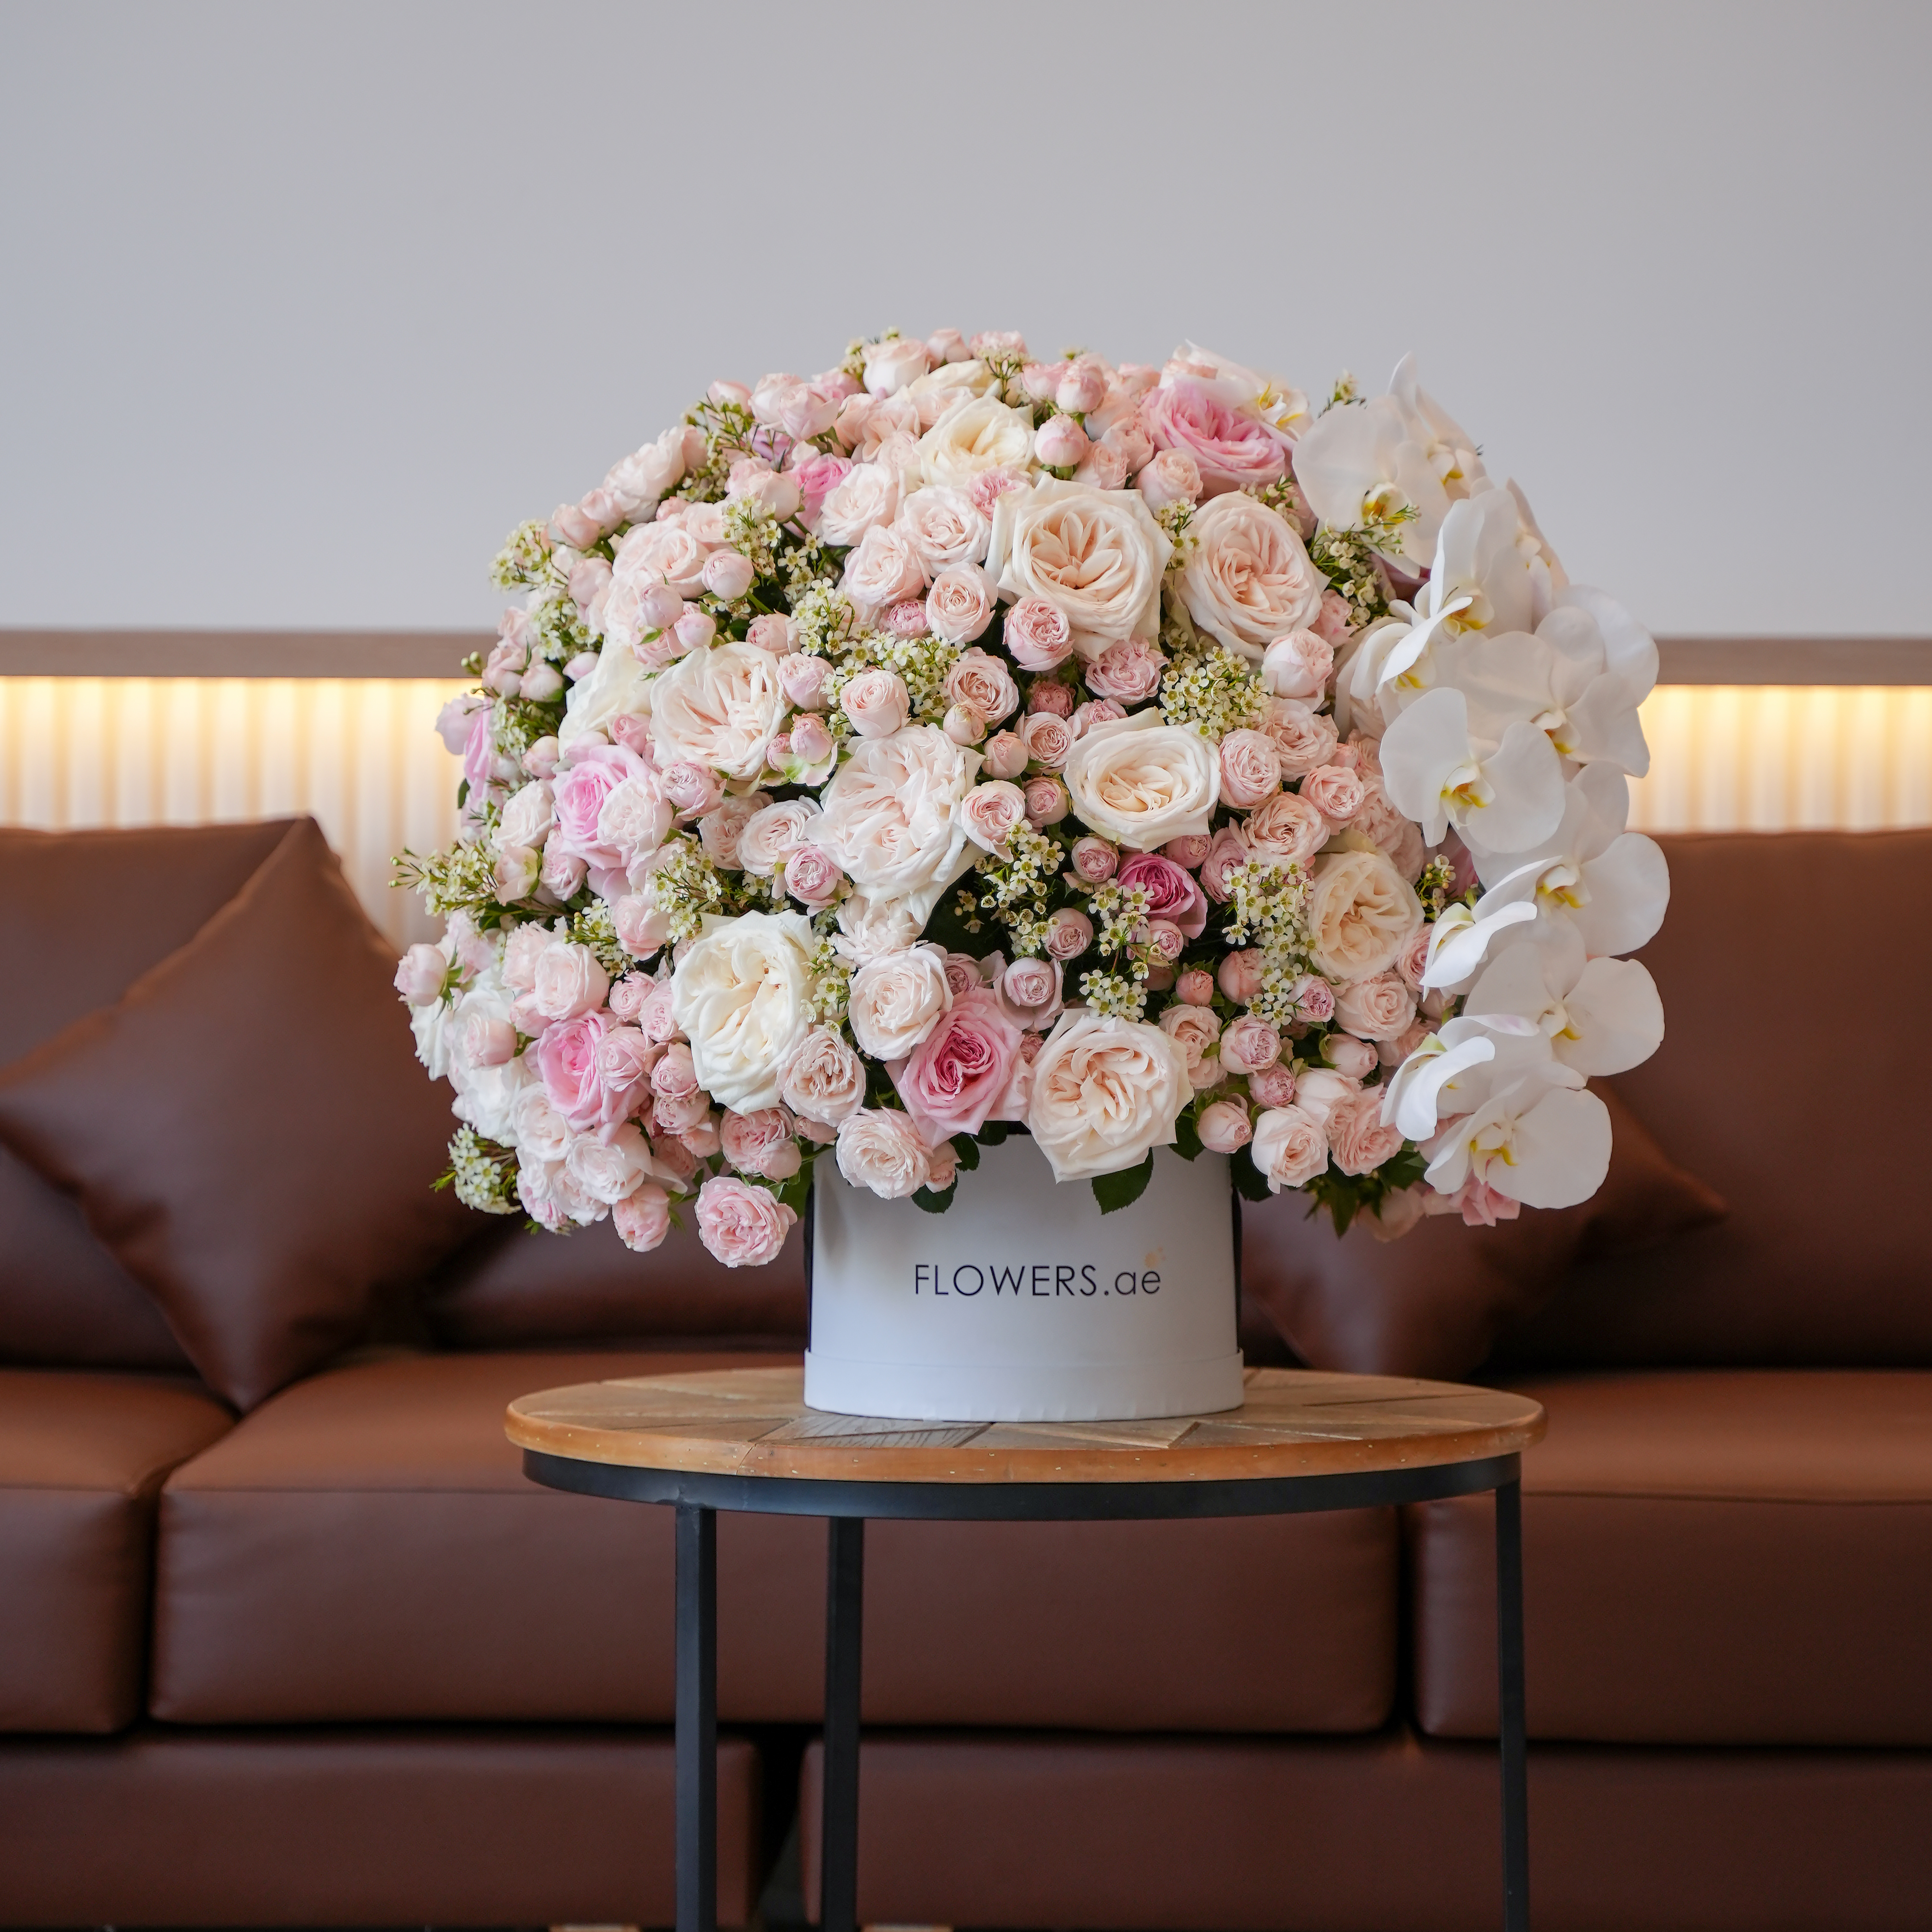 Flower delivery service UAE